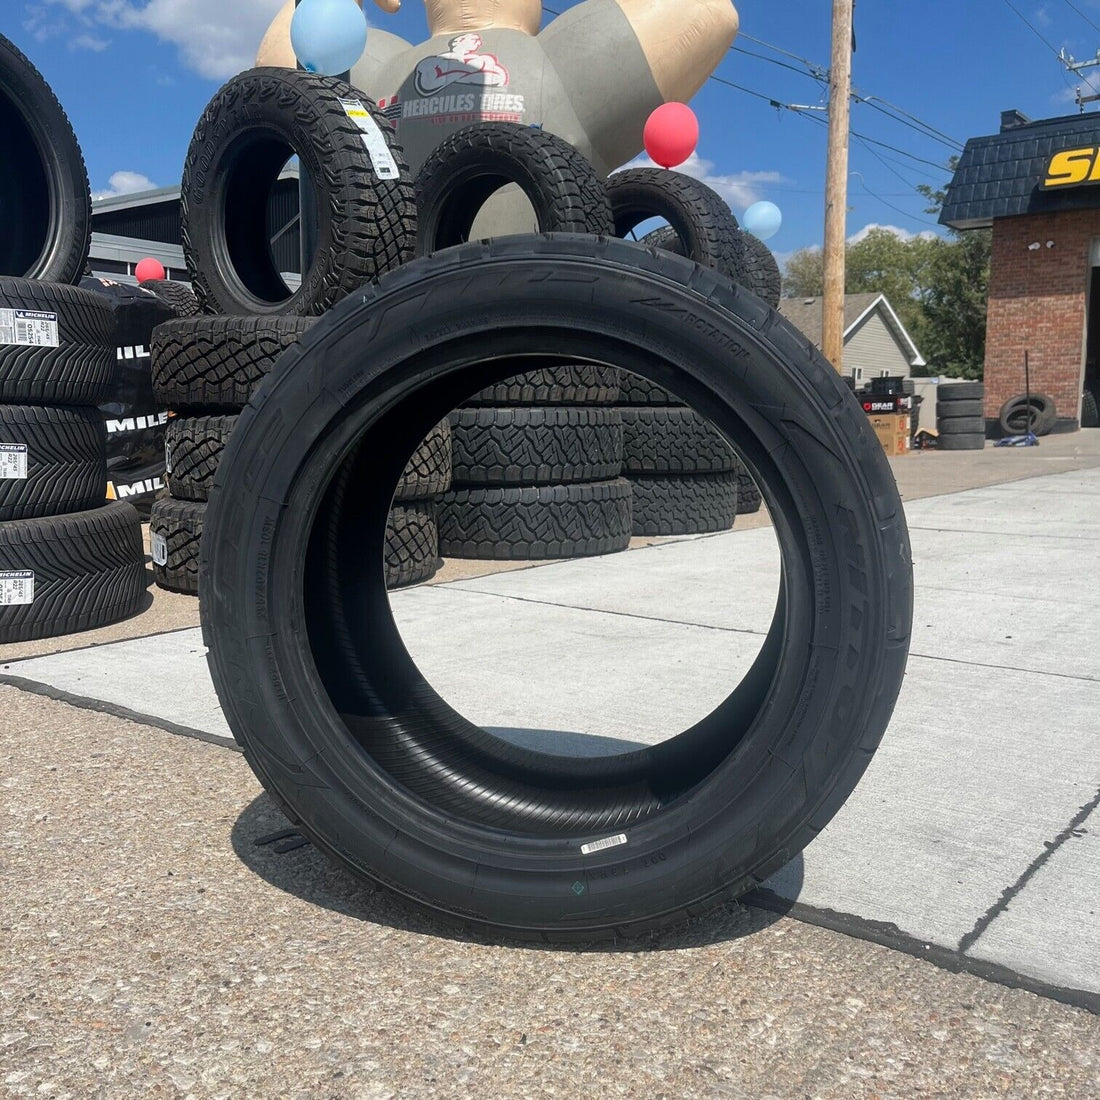 2 New 225/50ZR17 Nitto NT555 G2 98W 225 50 17 Tires - XL Ply